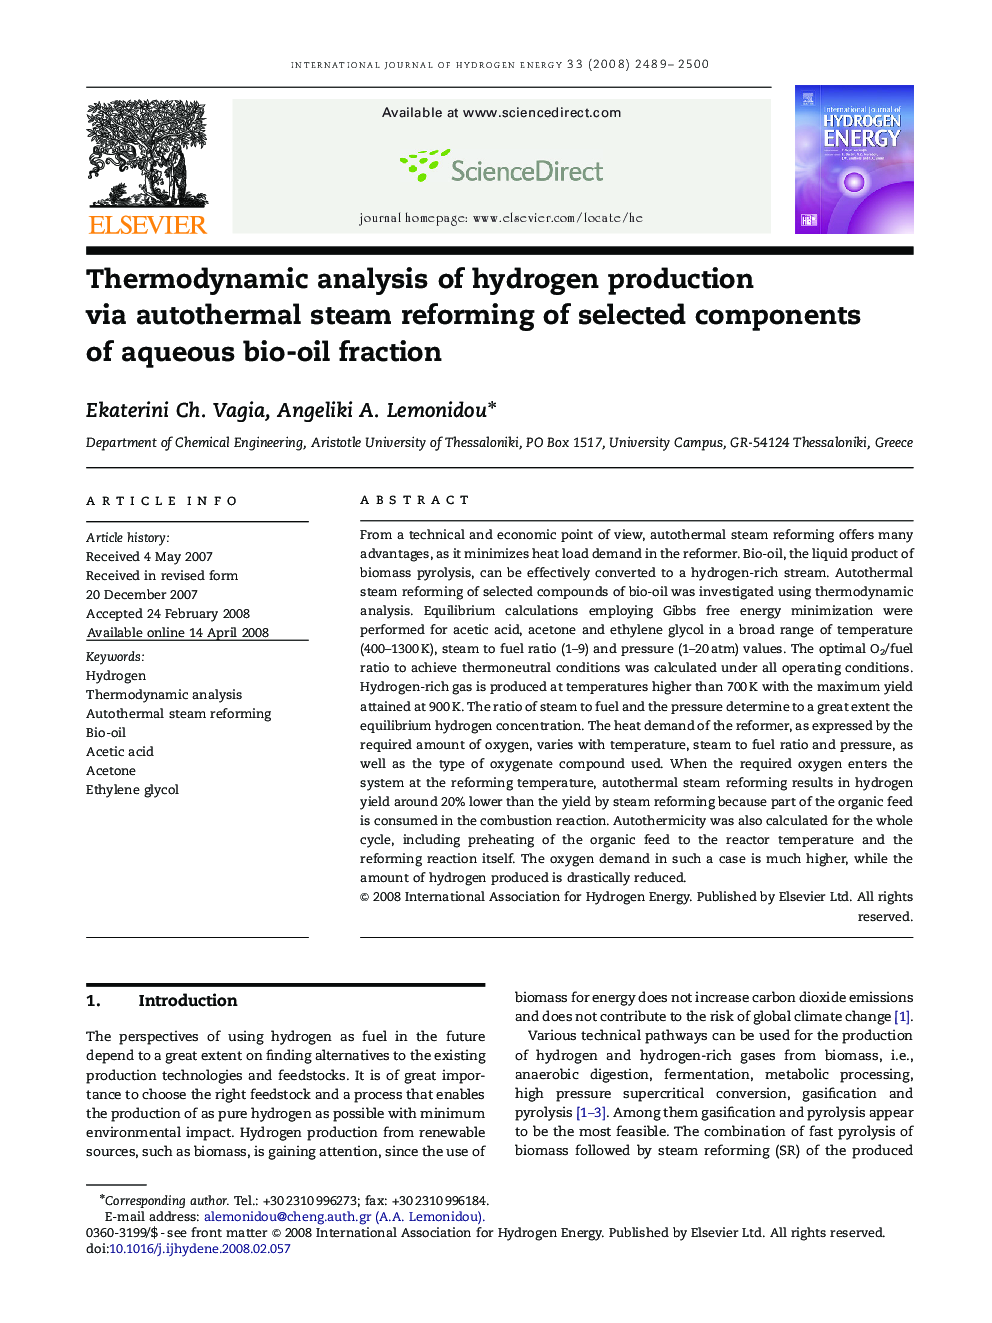 Thermodynamic analysis of hydrogen production via autothermal steam reforming of selected components of aqueous bio-oil fraction